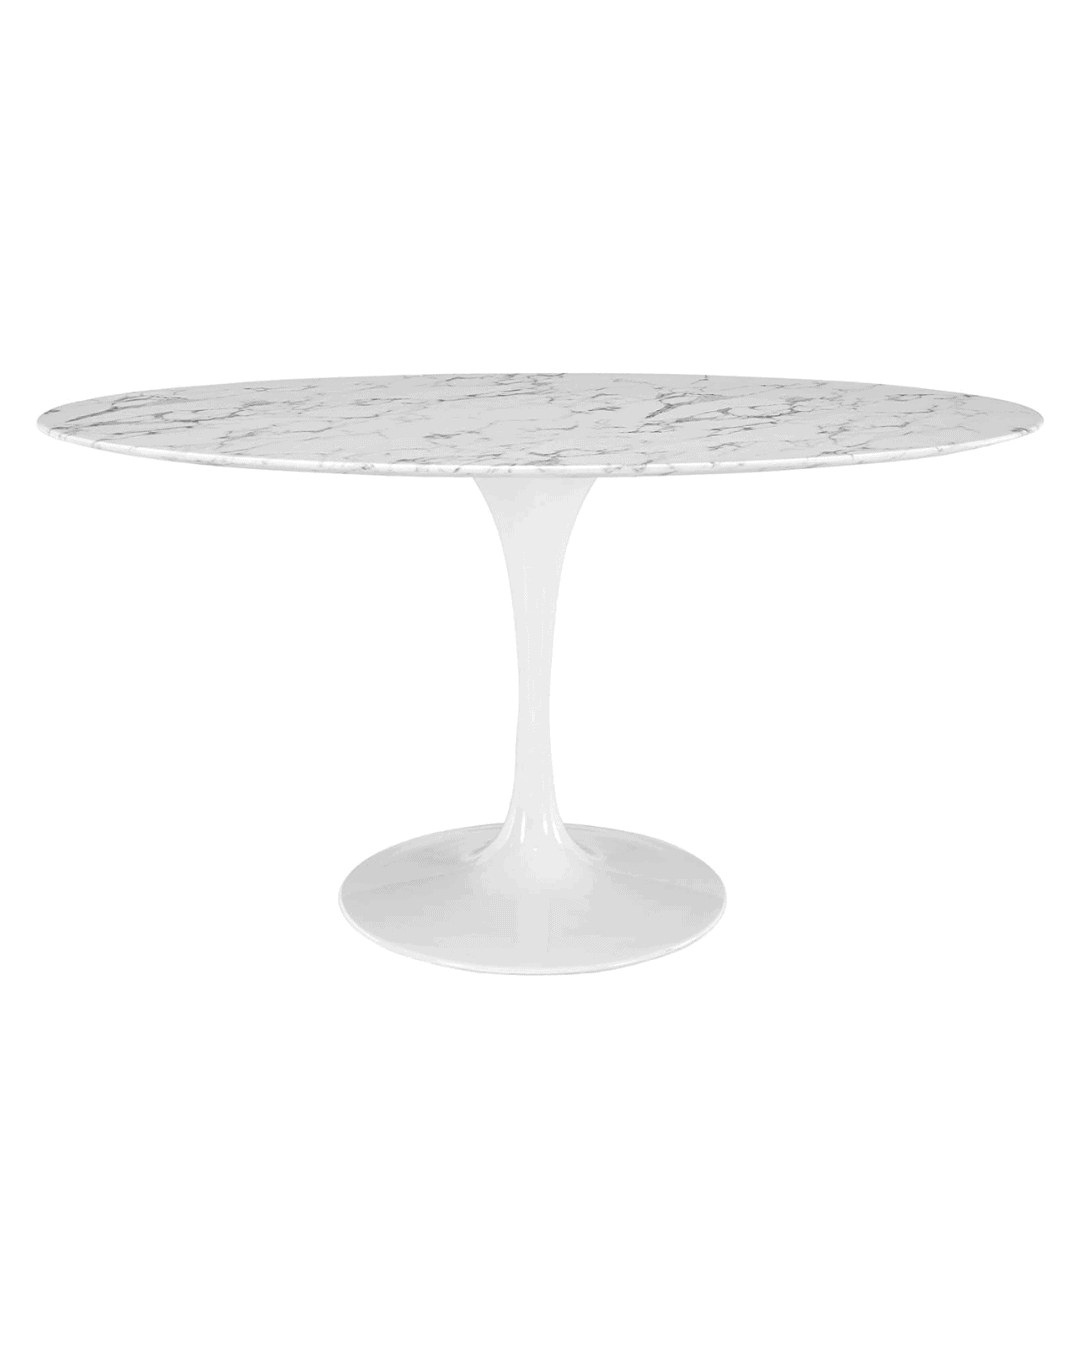 Oval-Shaped Mid-Century Modern Dining Table